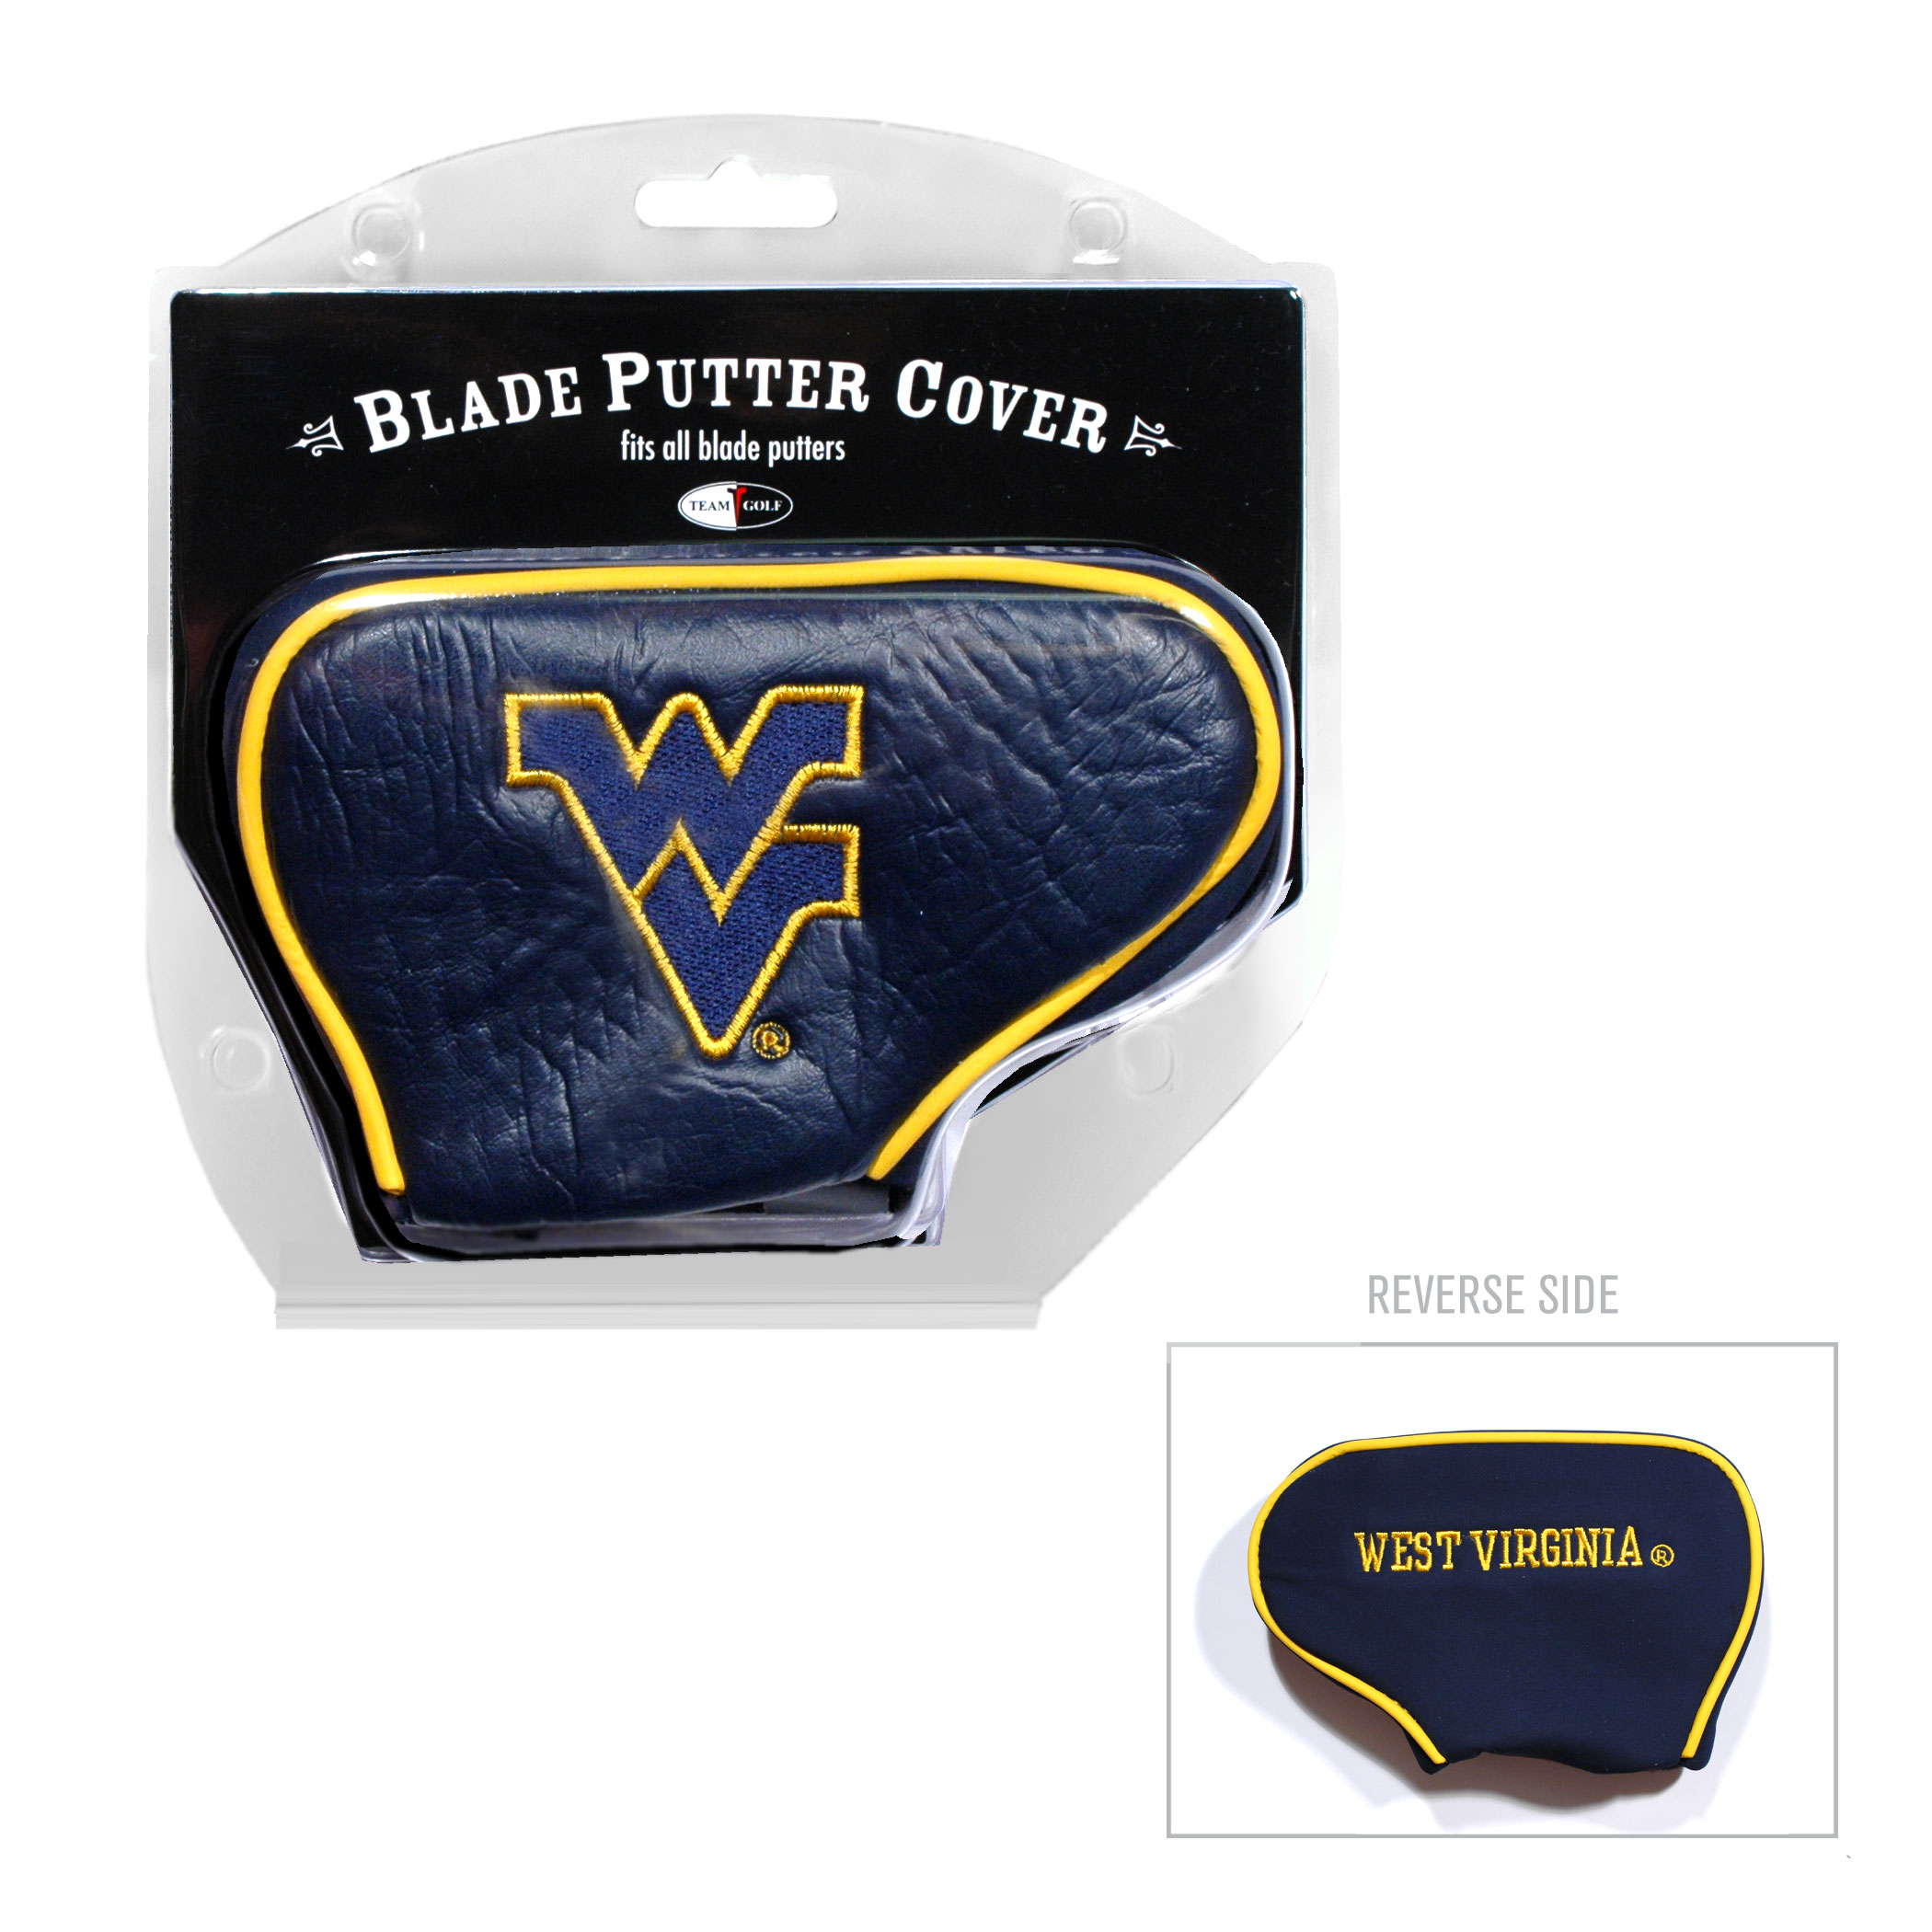 West Virginia Blade Putter Cover